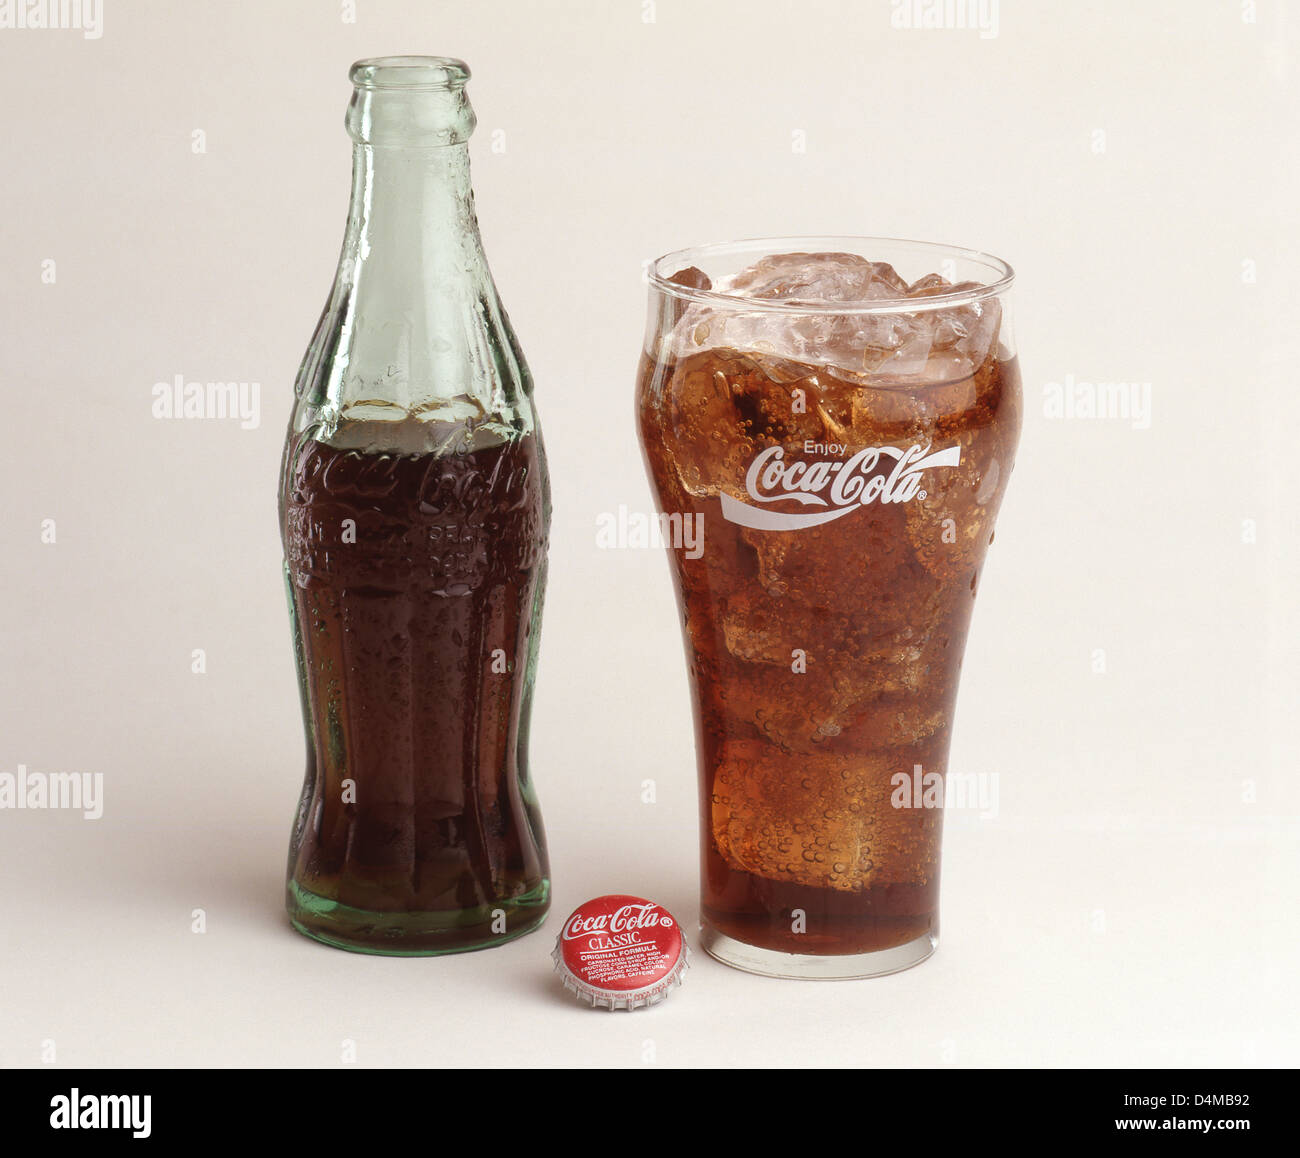 Traditional bottle and glass of Coca-Cola, Los Angeles, California, United States of America Stock Photo